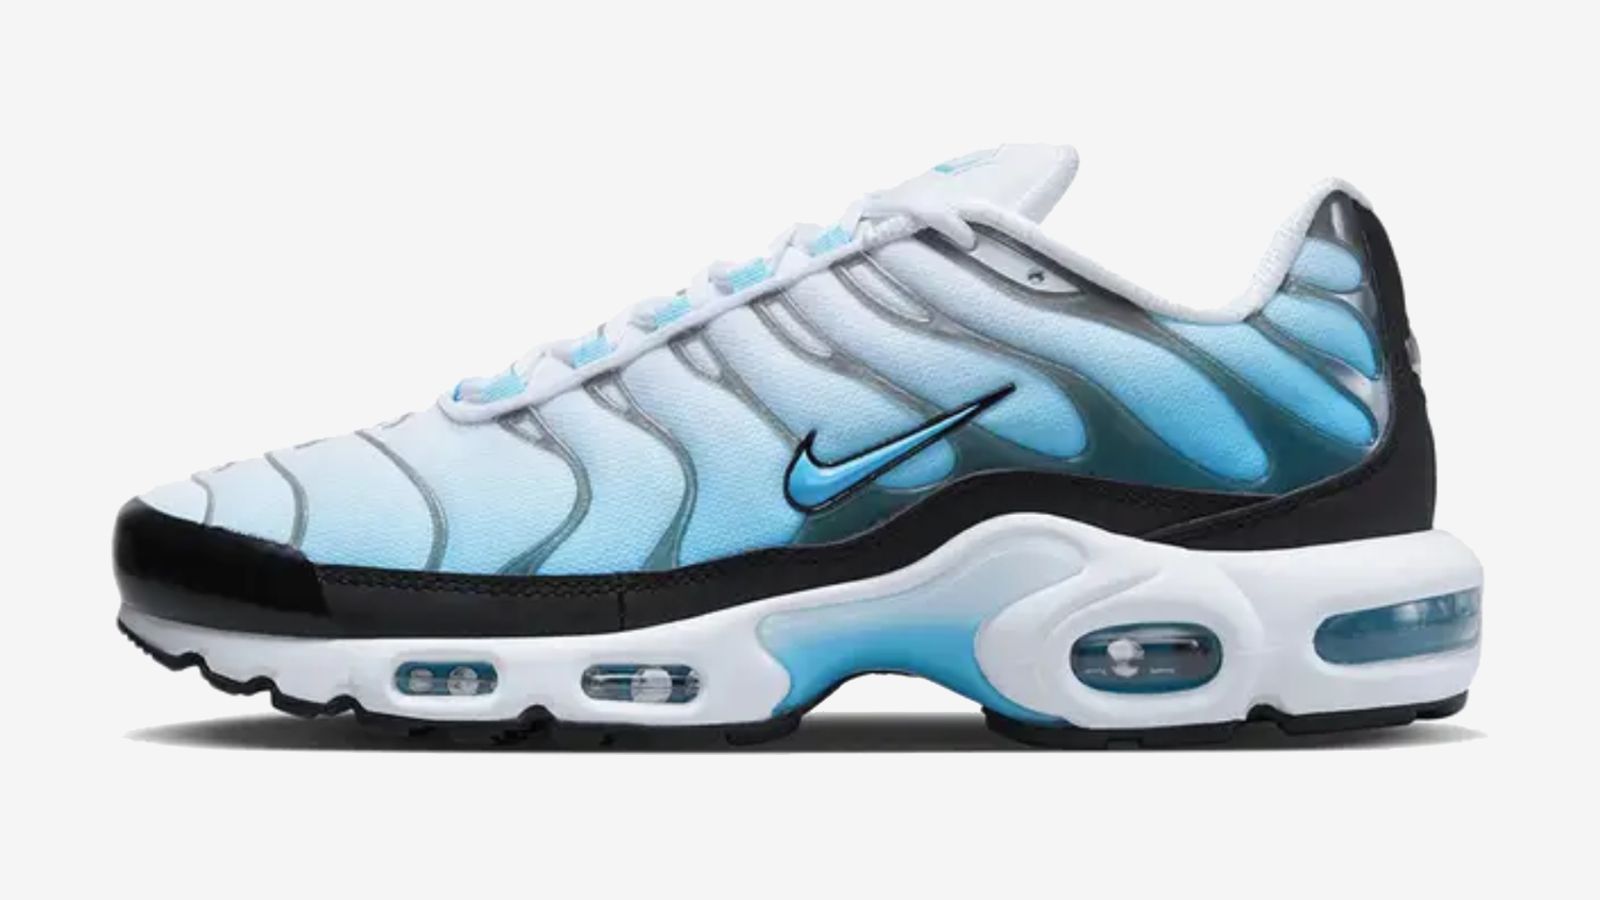 Nike Air Max Plus "Baltic Blue" product image of a white-to-blue gradient sneaker with black details.